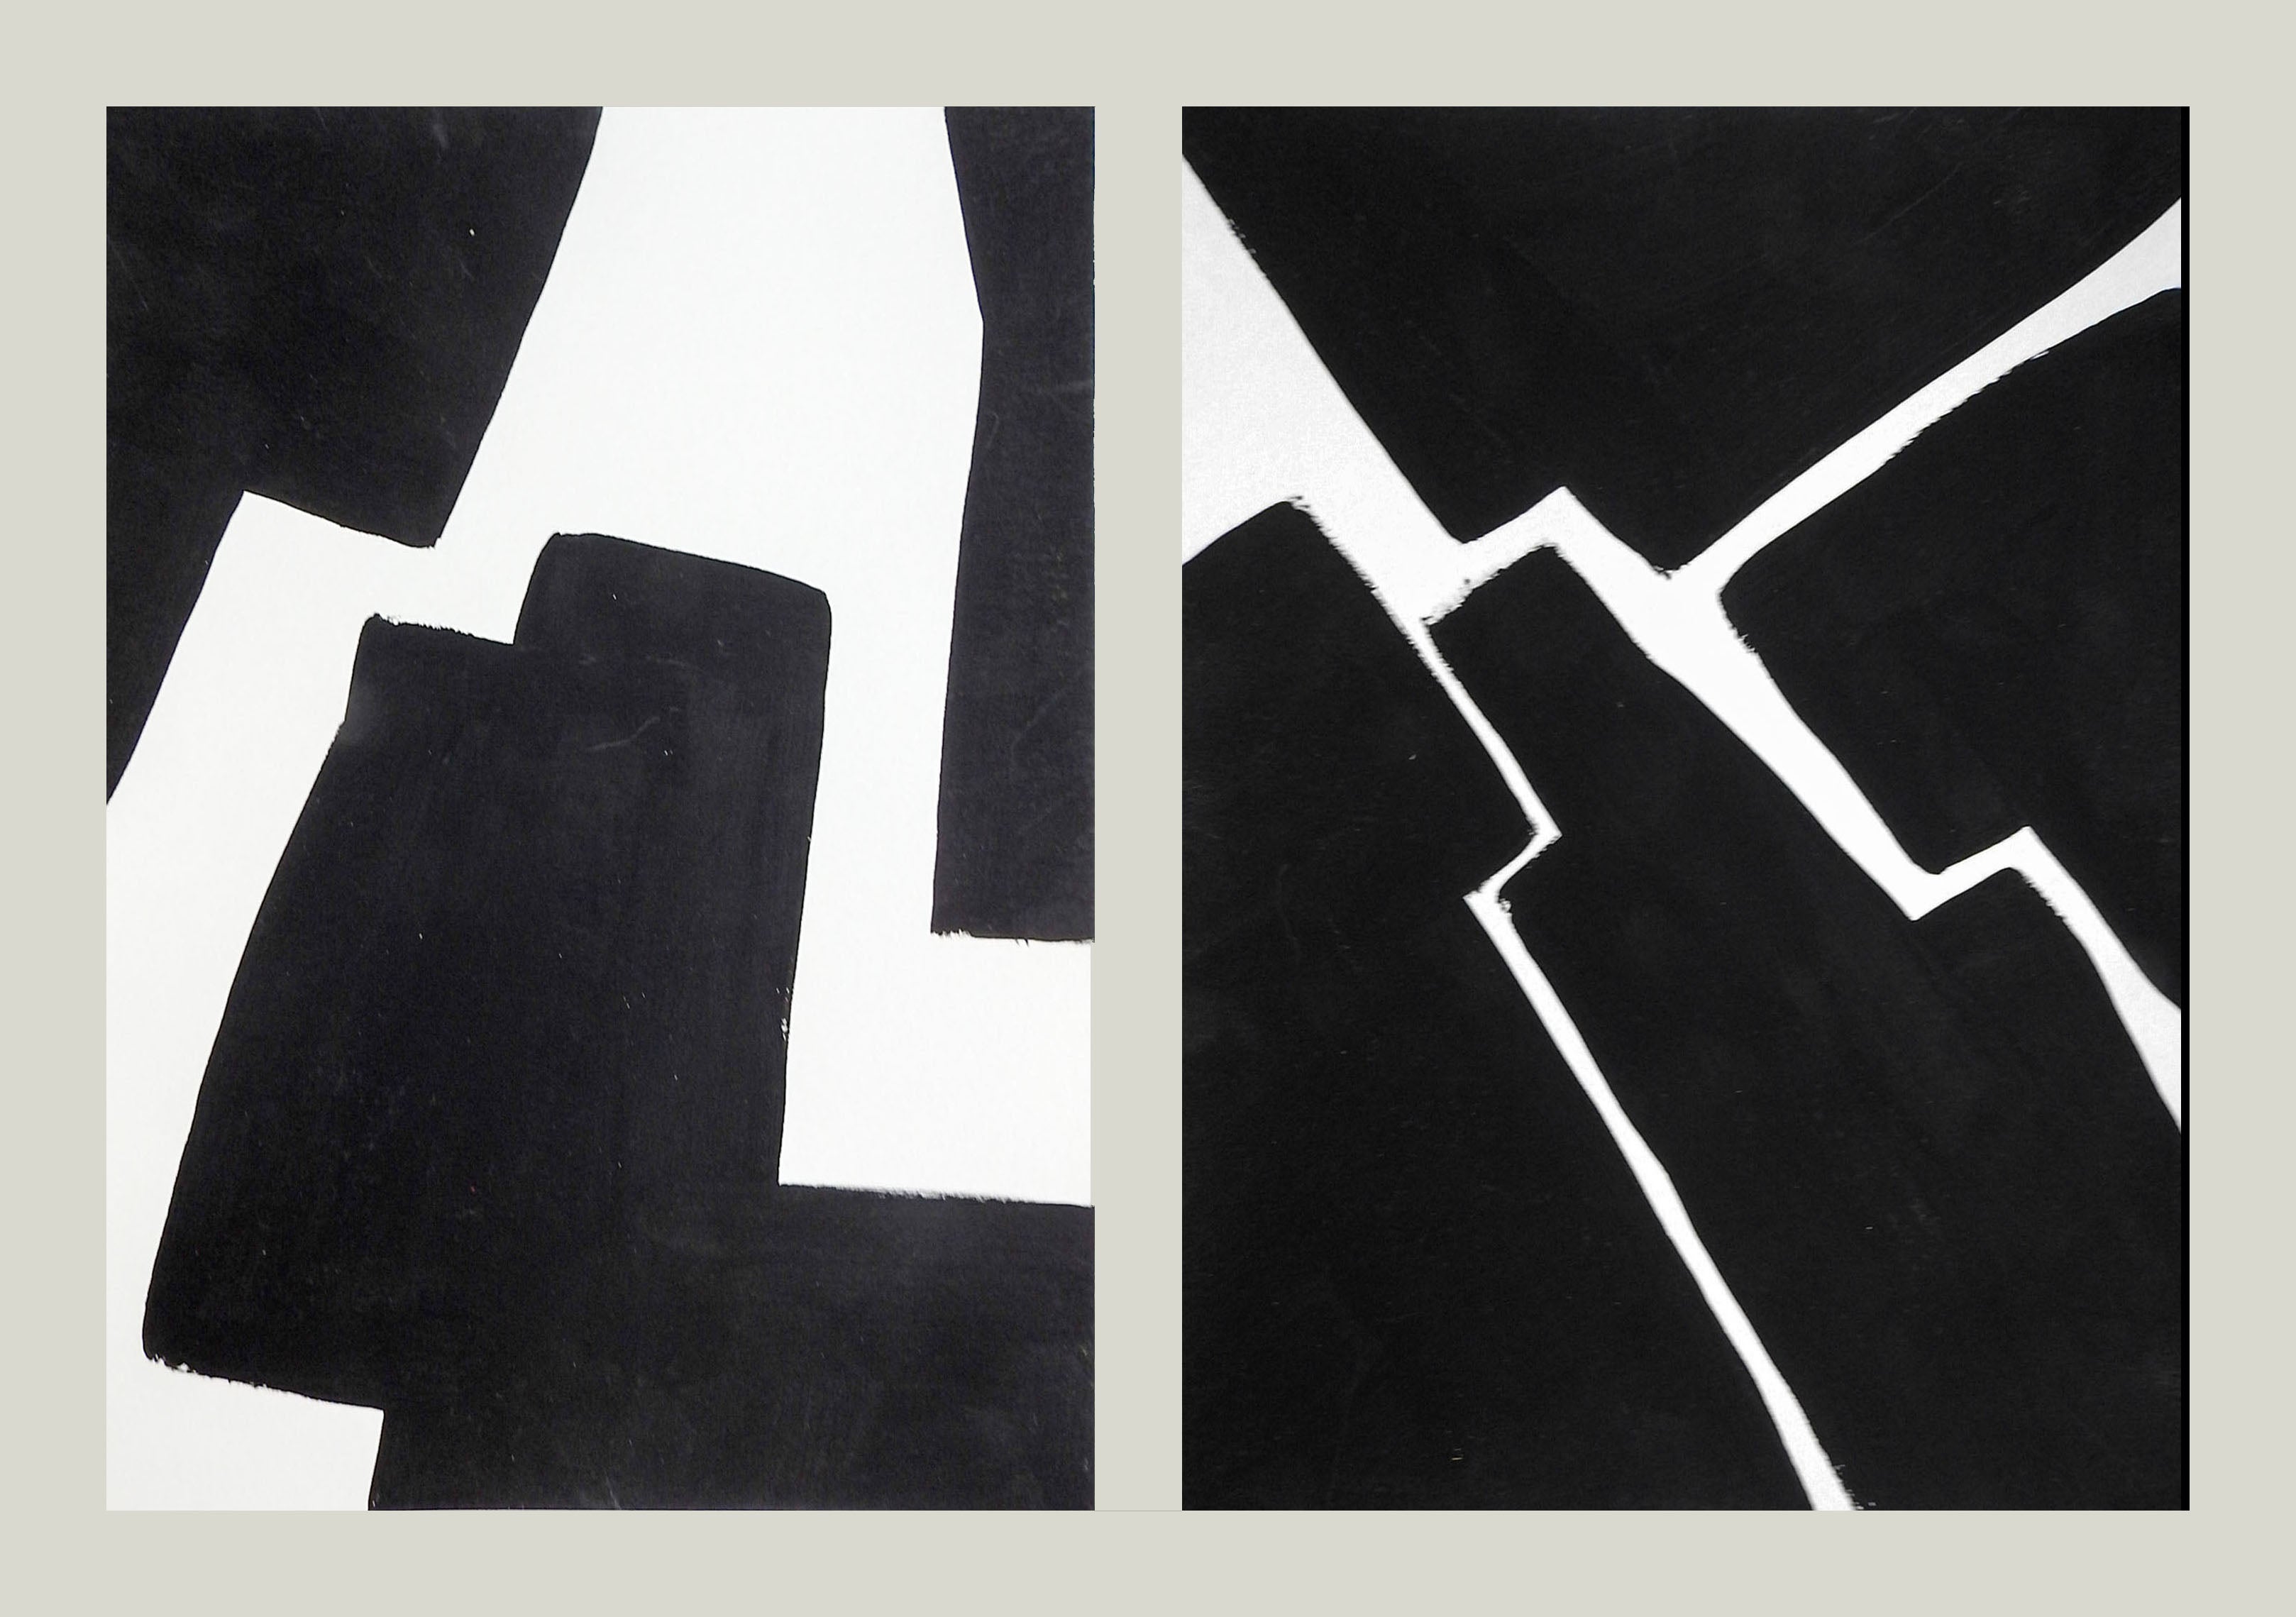 Pair of contemporary 2020 black and white abstract gouache on paper painting by David Grinnell (21st century) Texas. Signed. dated and titled Black Spaces III and V on verso. Unframed, good condition.